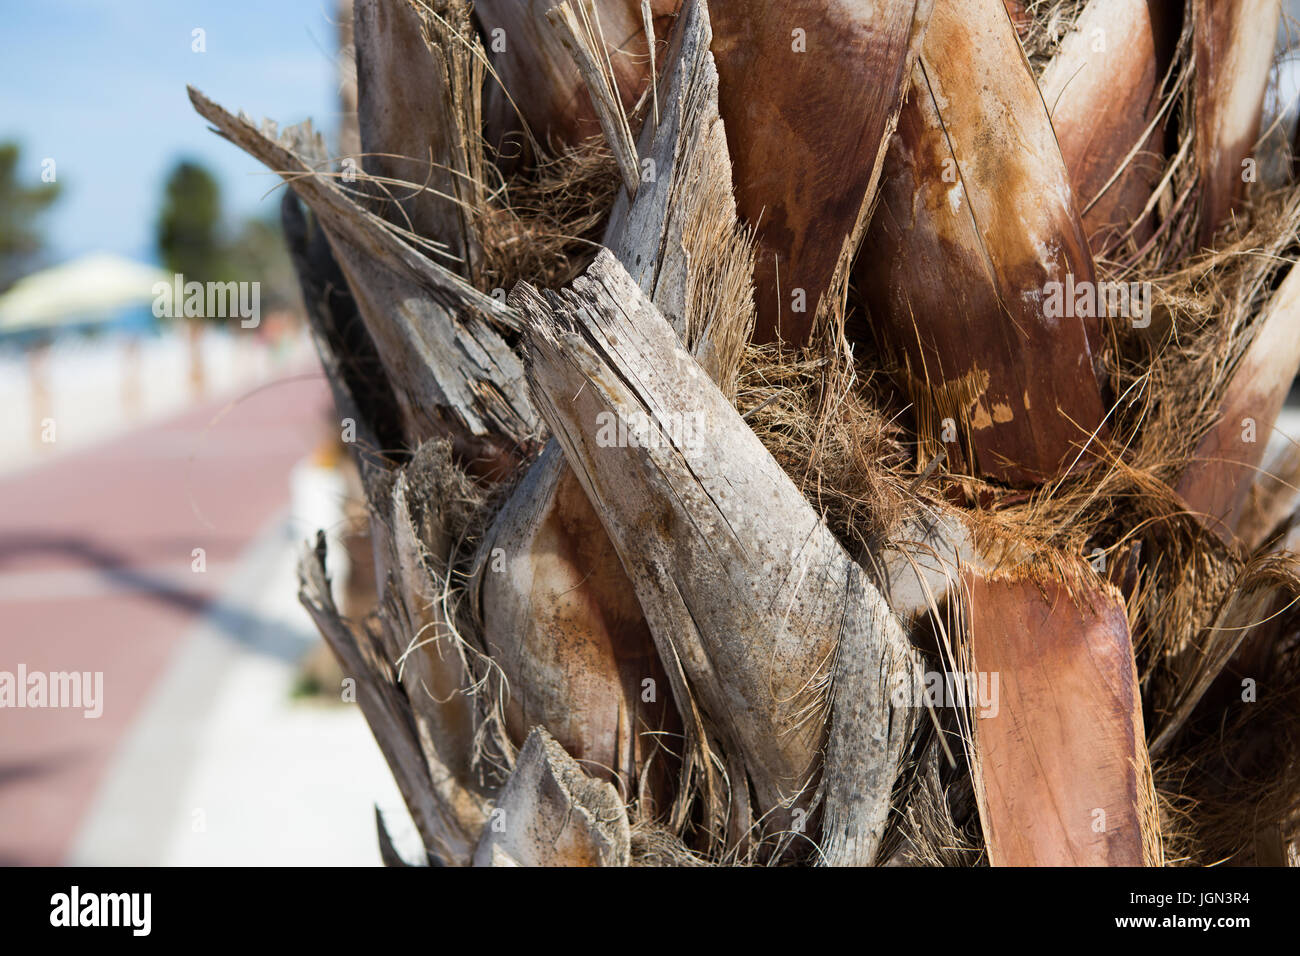 MAKARSKA,CROTIA - 16 JUNE,2017: Palm tree close up. Palms branches in close up shot. Detailed photo of tropical plant Stock Photo